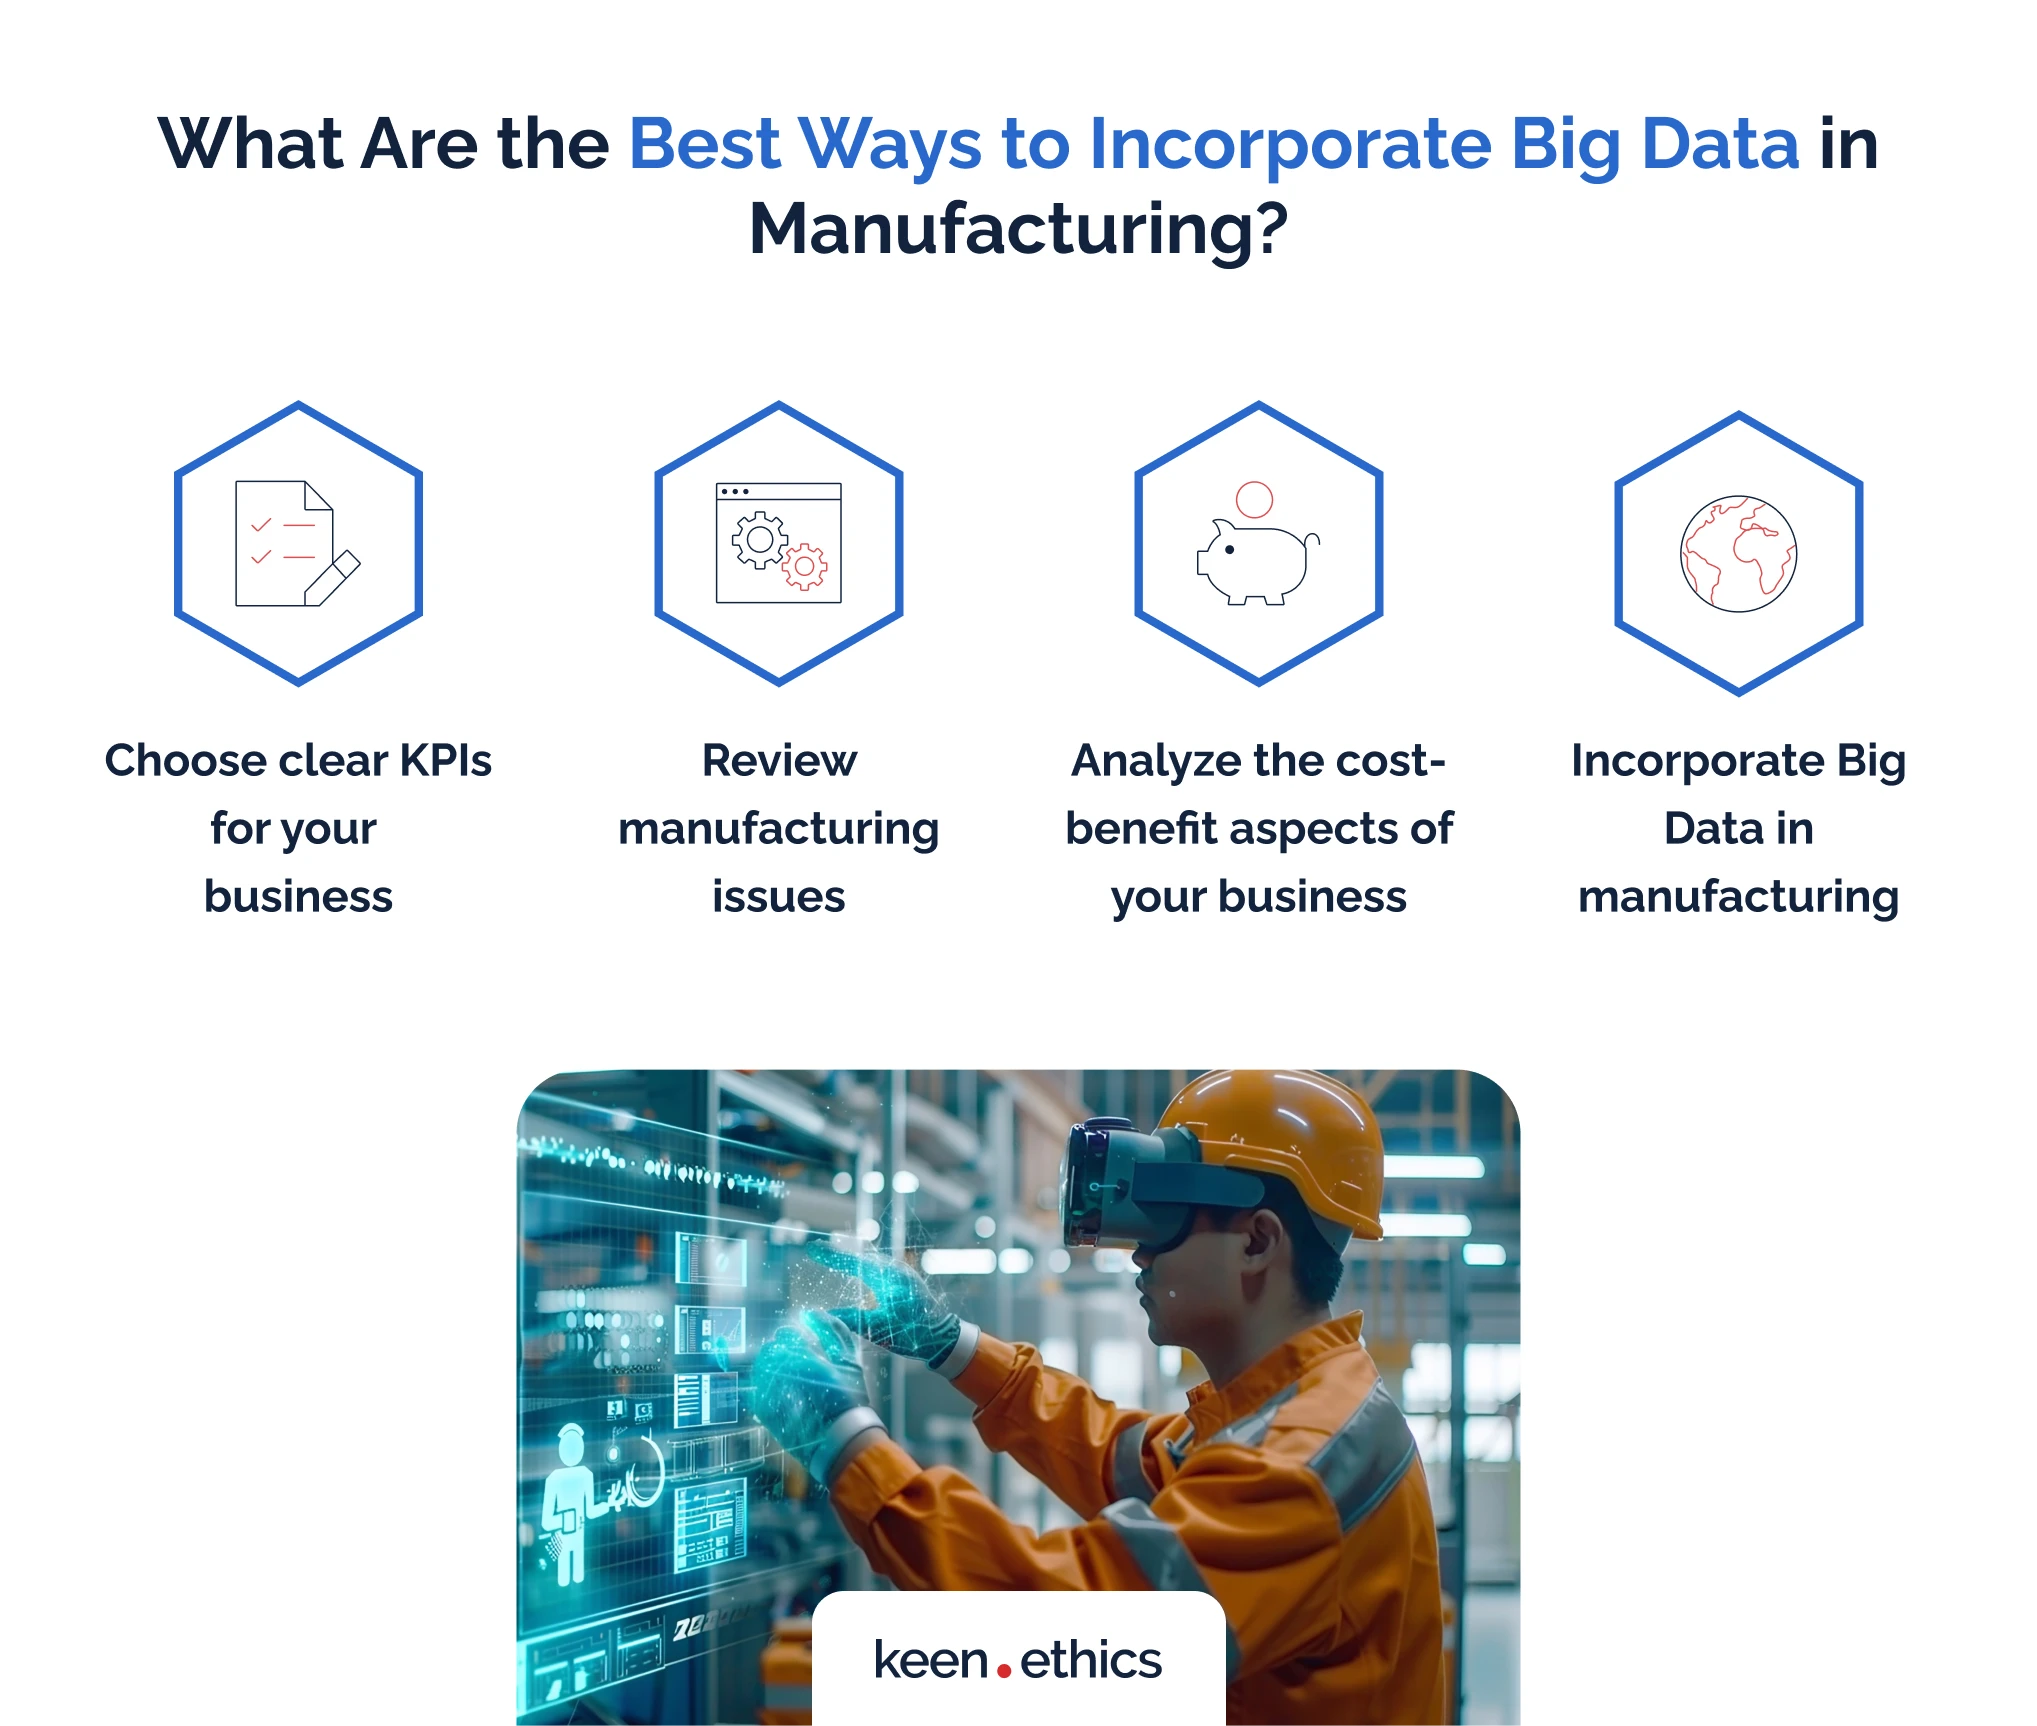 What are the best ways to incorporate big data in manufacturing